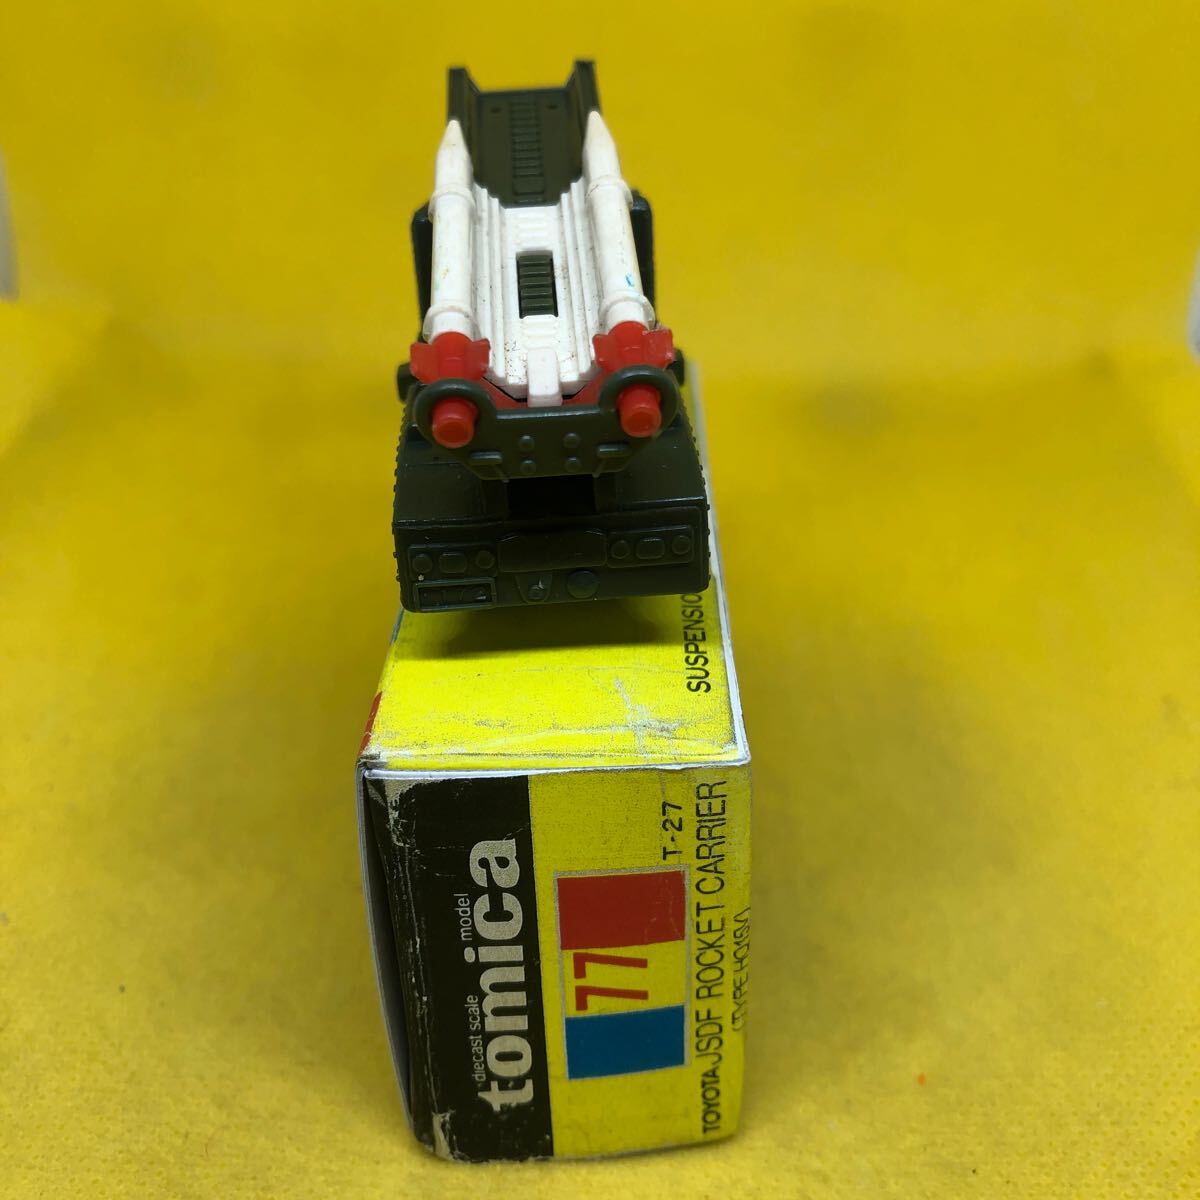  Tomica made in Japan black box 77 Toyota self .. Rocket car that time thing out of print 